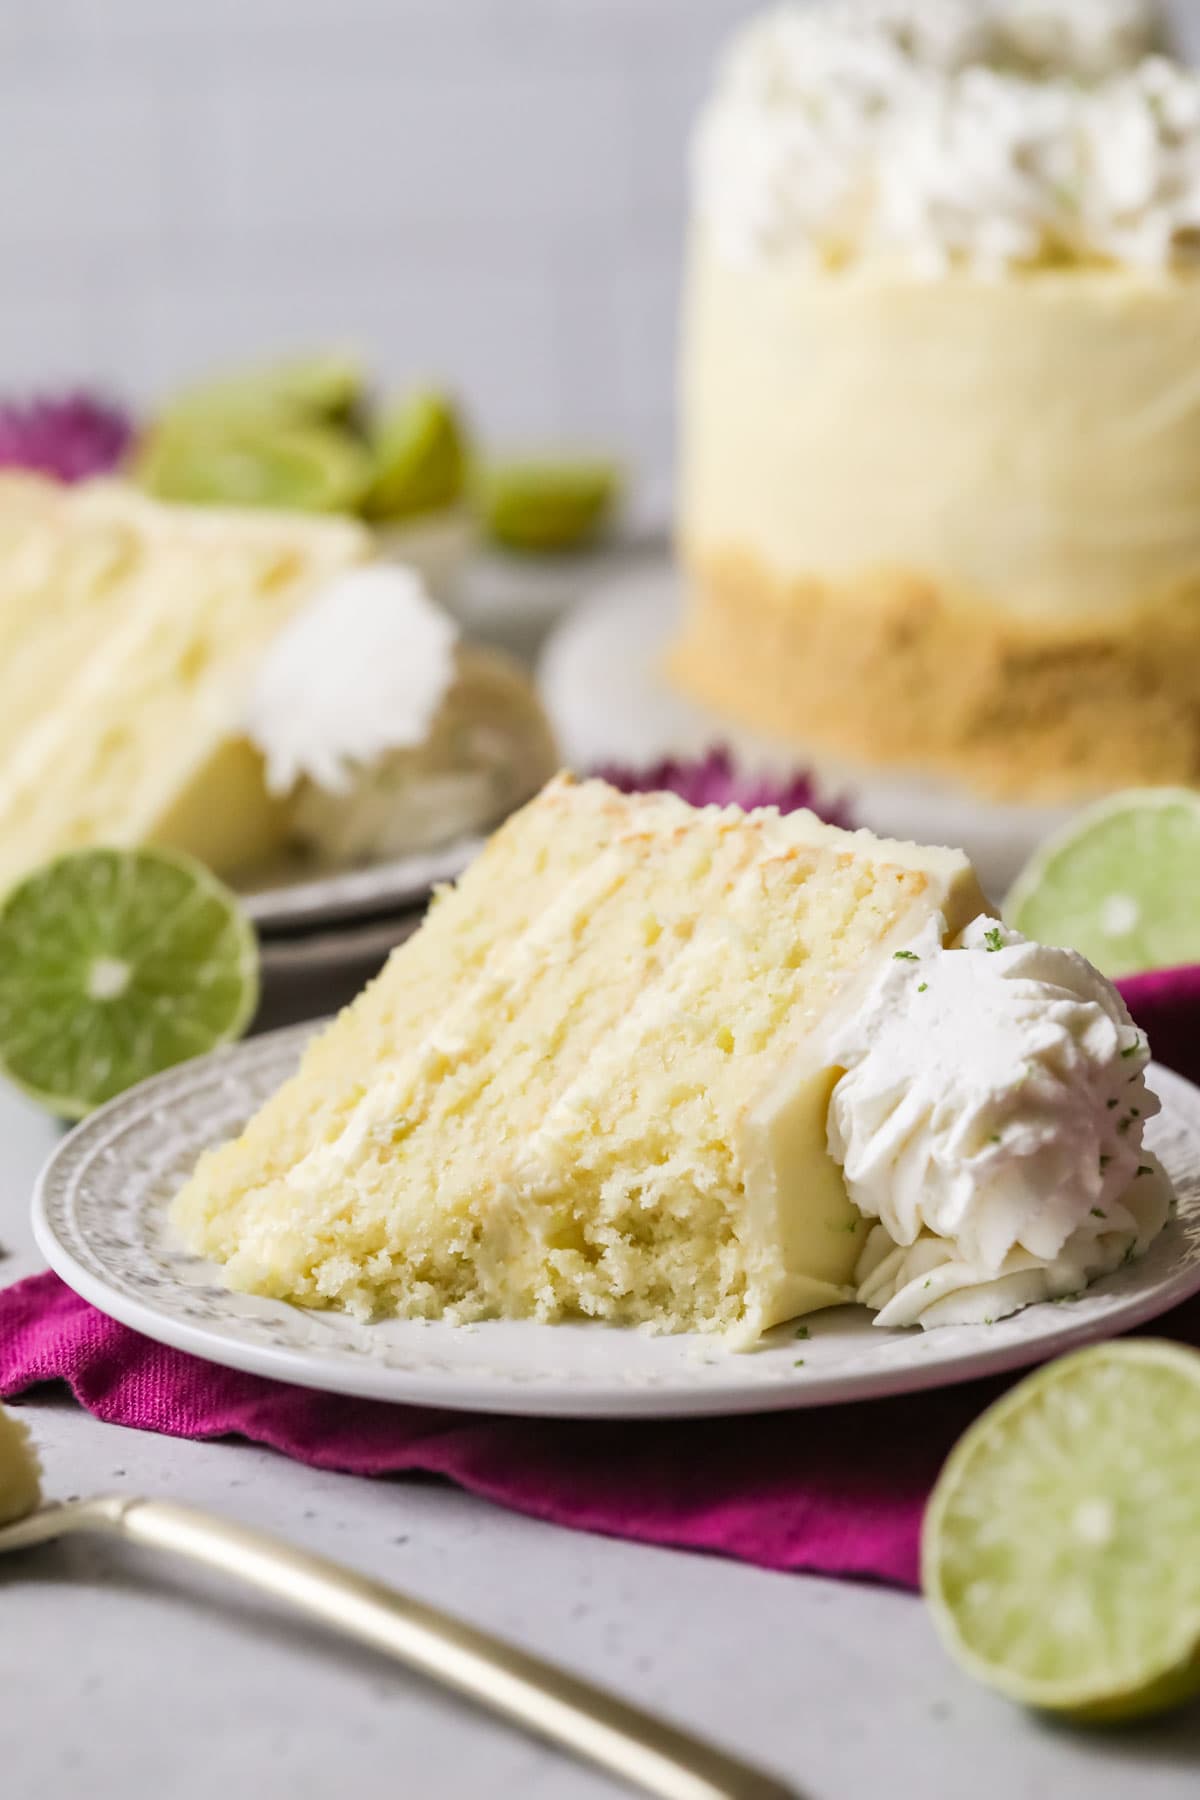 Slice of cake frosted with a key lime frosting missing a few bites.